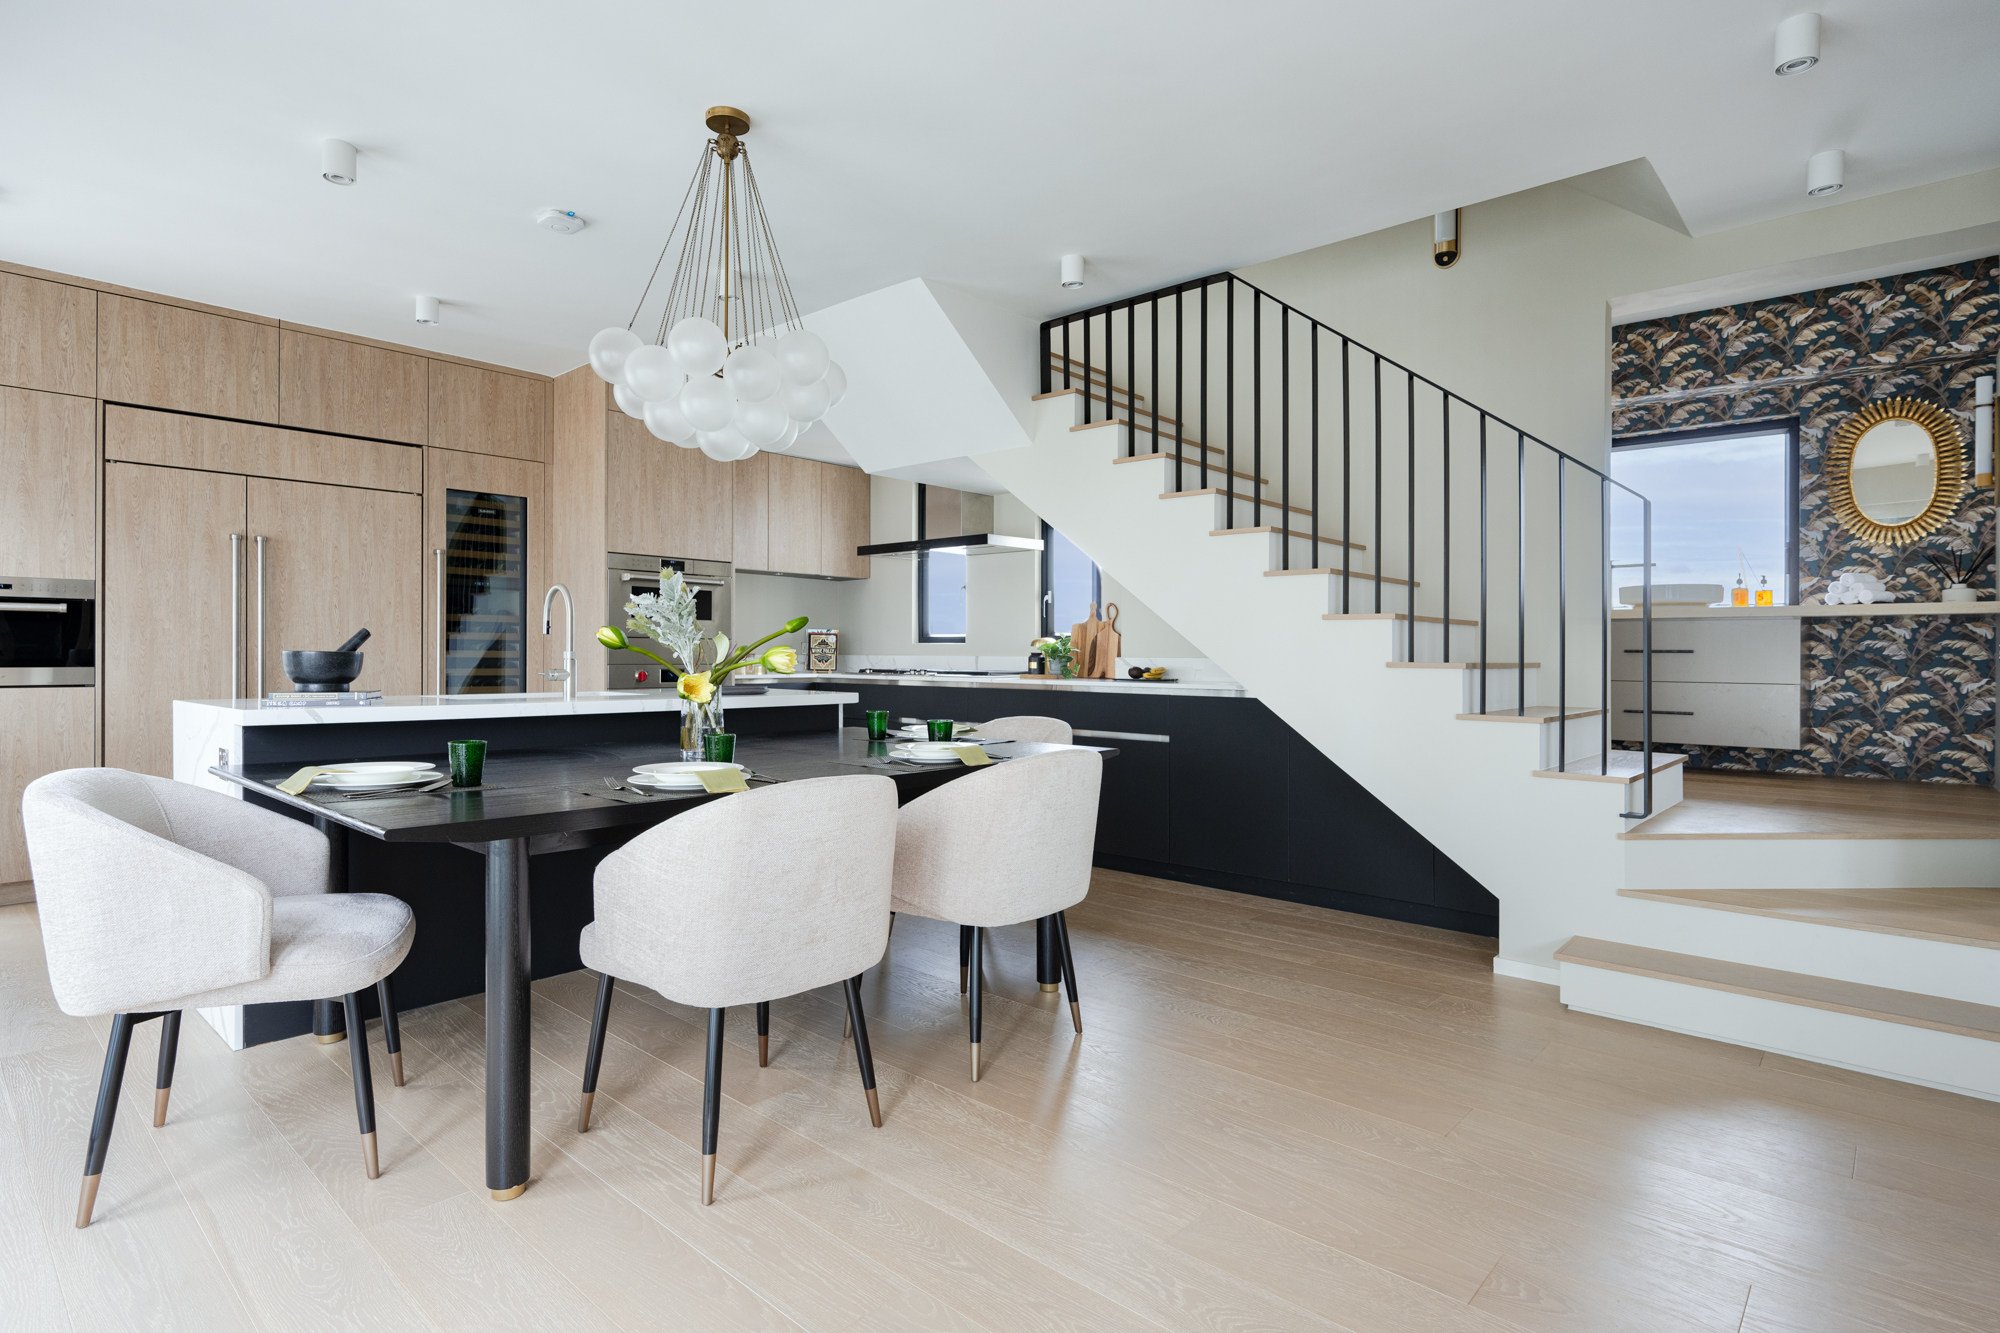 The dining area on the lower floor of the Damienne Joly-designed flat in Mid-Levels, including the vanity section of a bathroom (behind the staircase) that Joly opened up to reveal a “priceless vista”. Photo: Eugene Chan